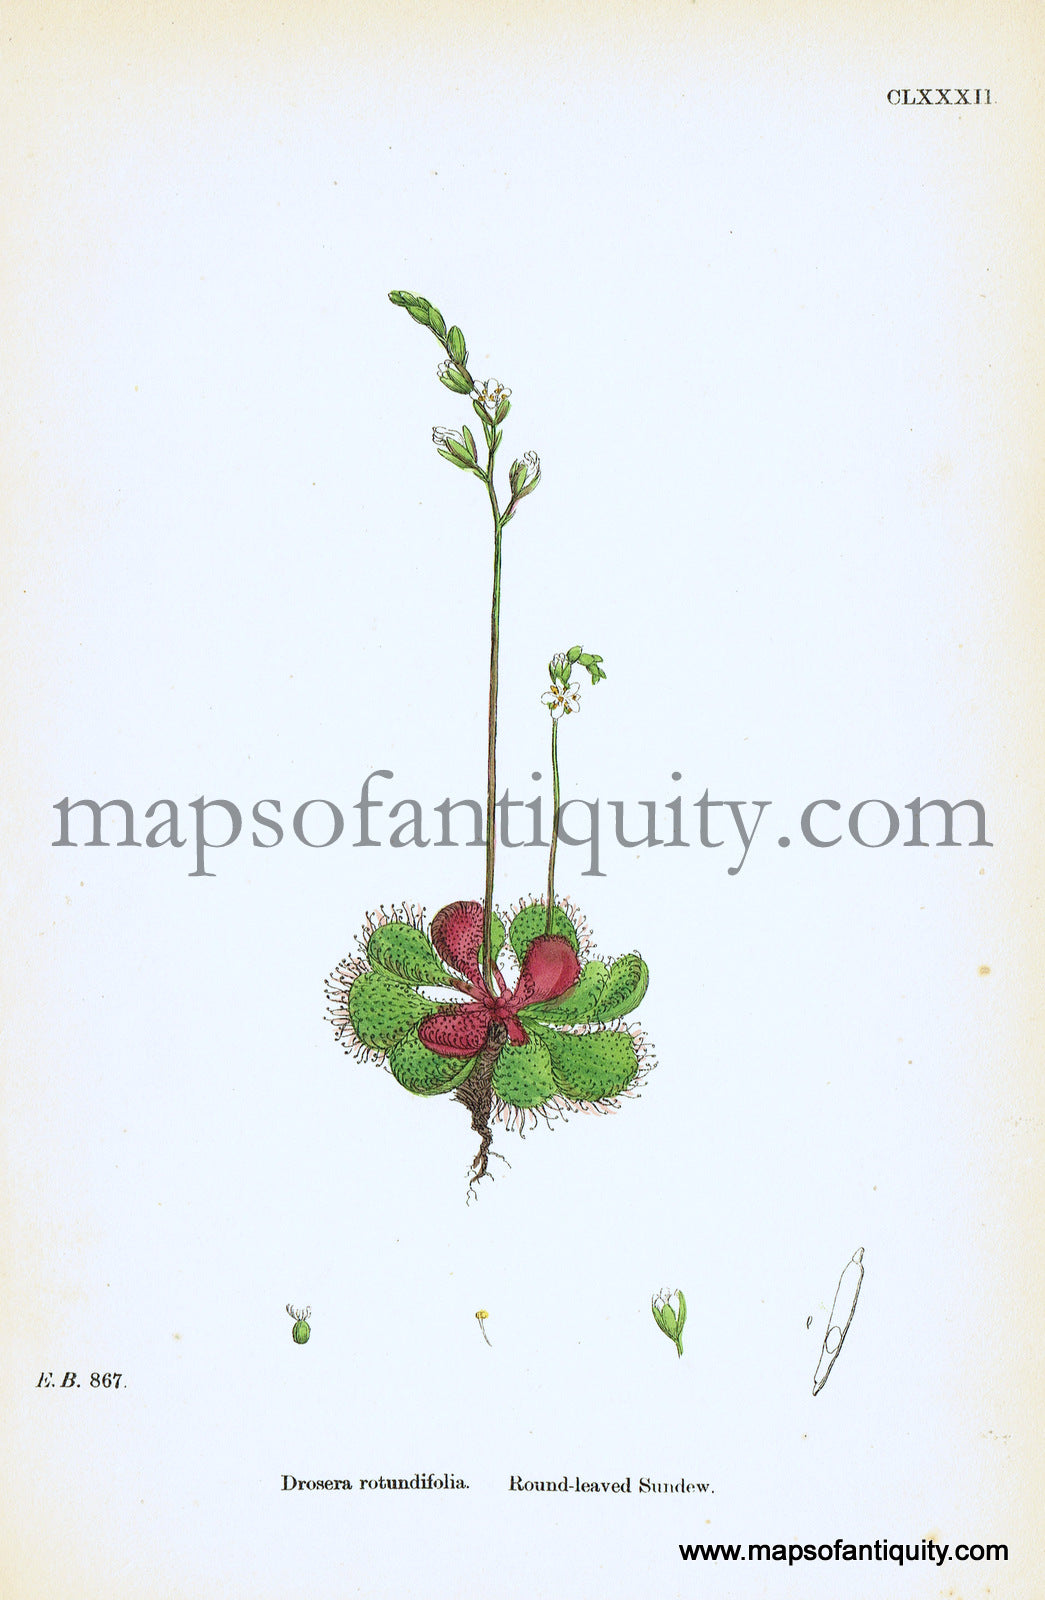 Antique-Hand-Colored-Print-Drosera-rotundifolia-Antique-Prints-Natural-History-Botanical-c.-1860-Sowerby-Maps-Of-Antiquity